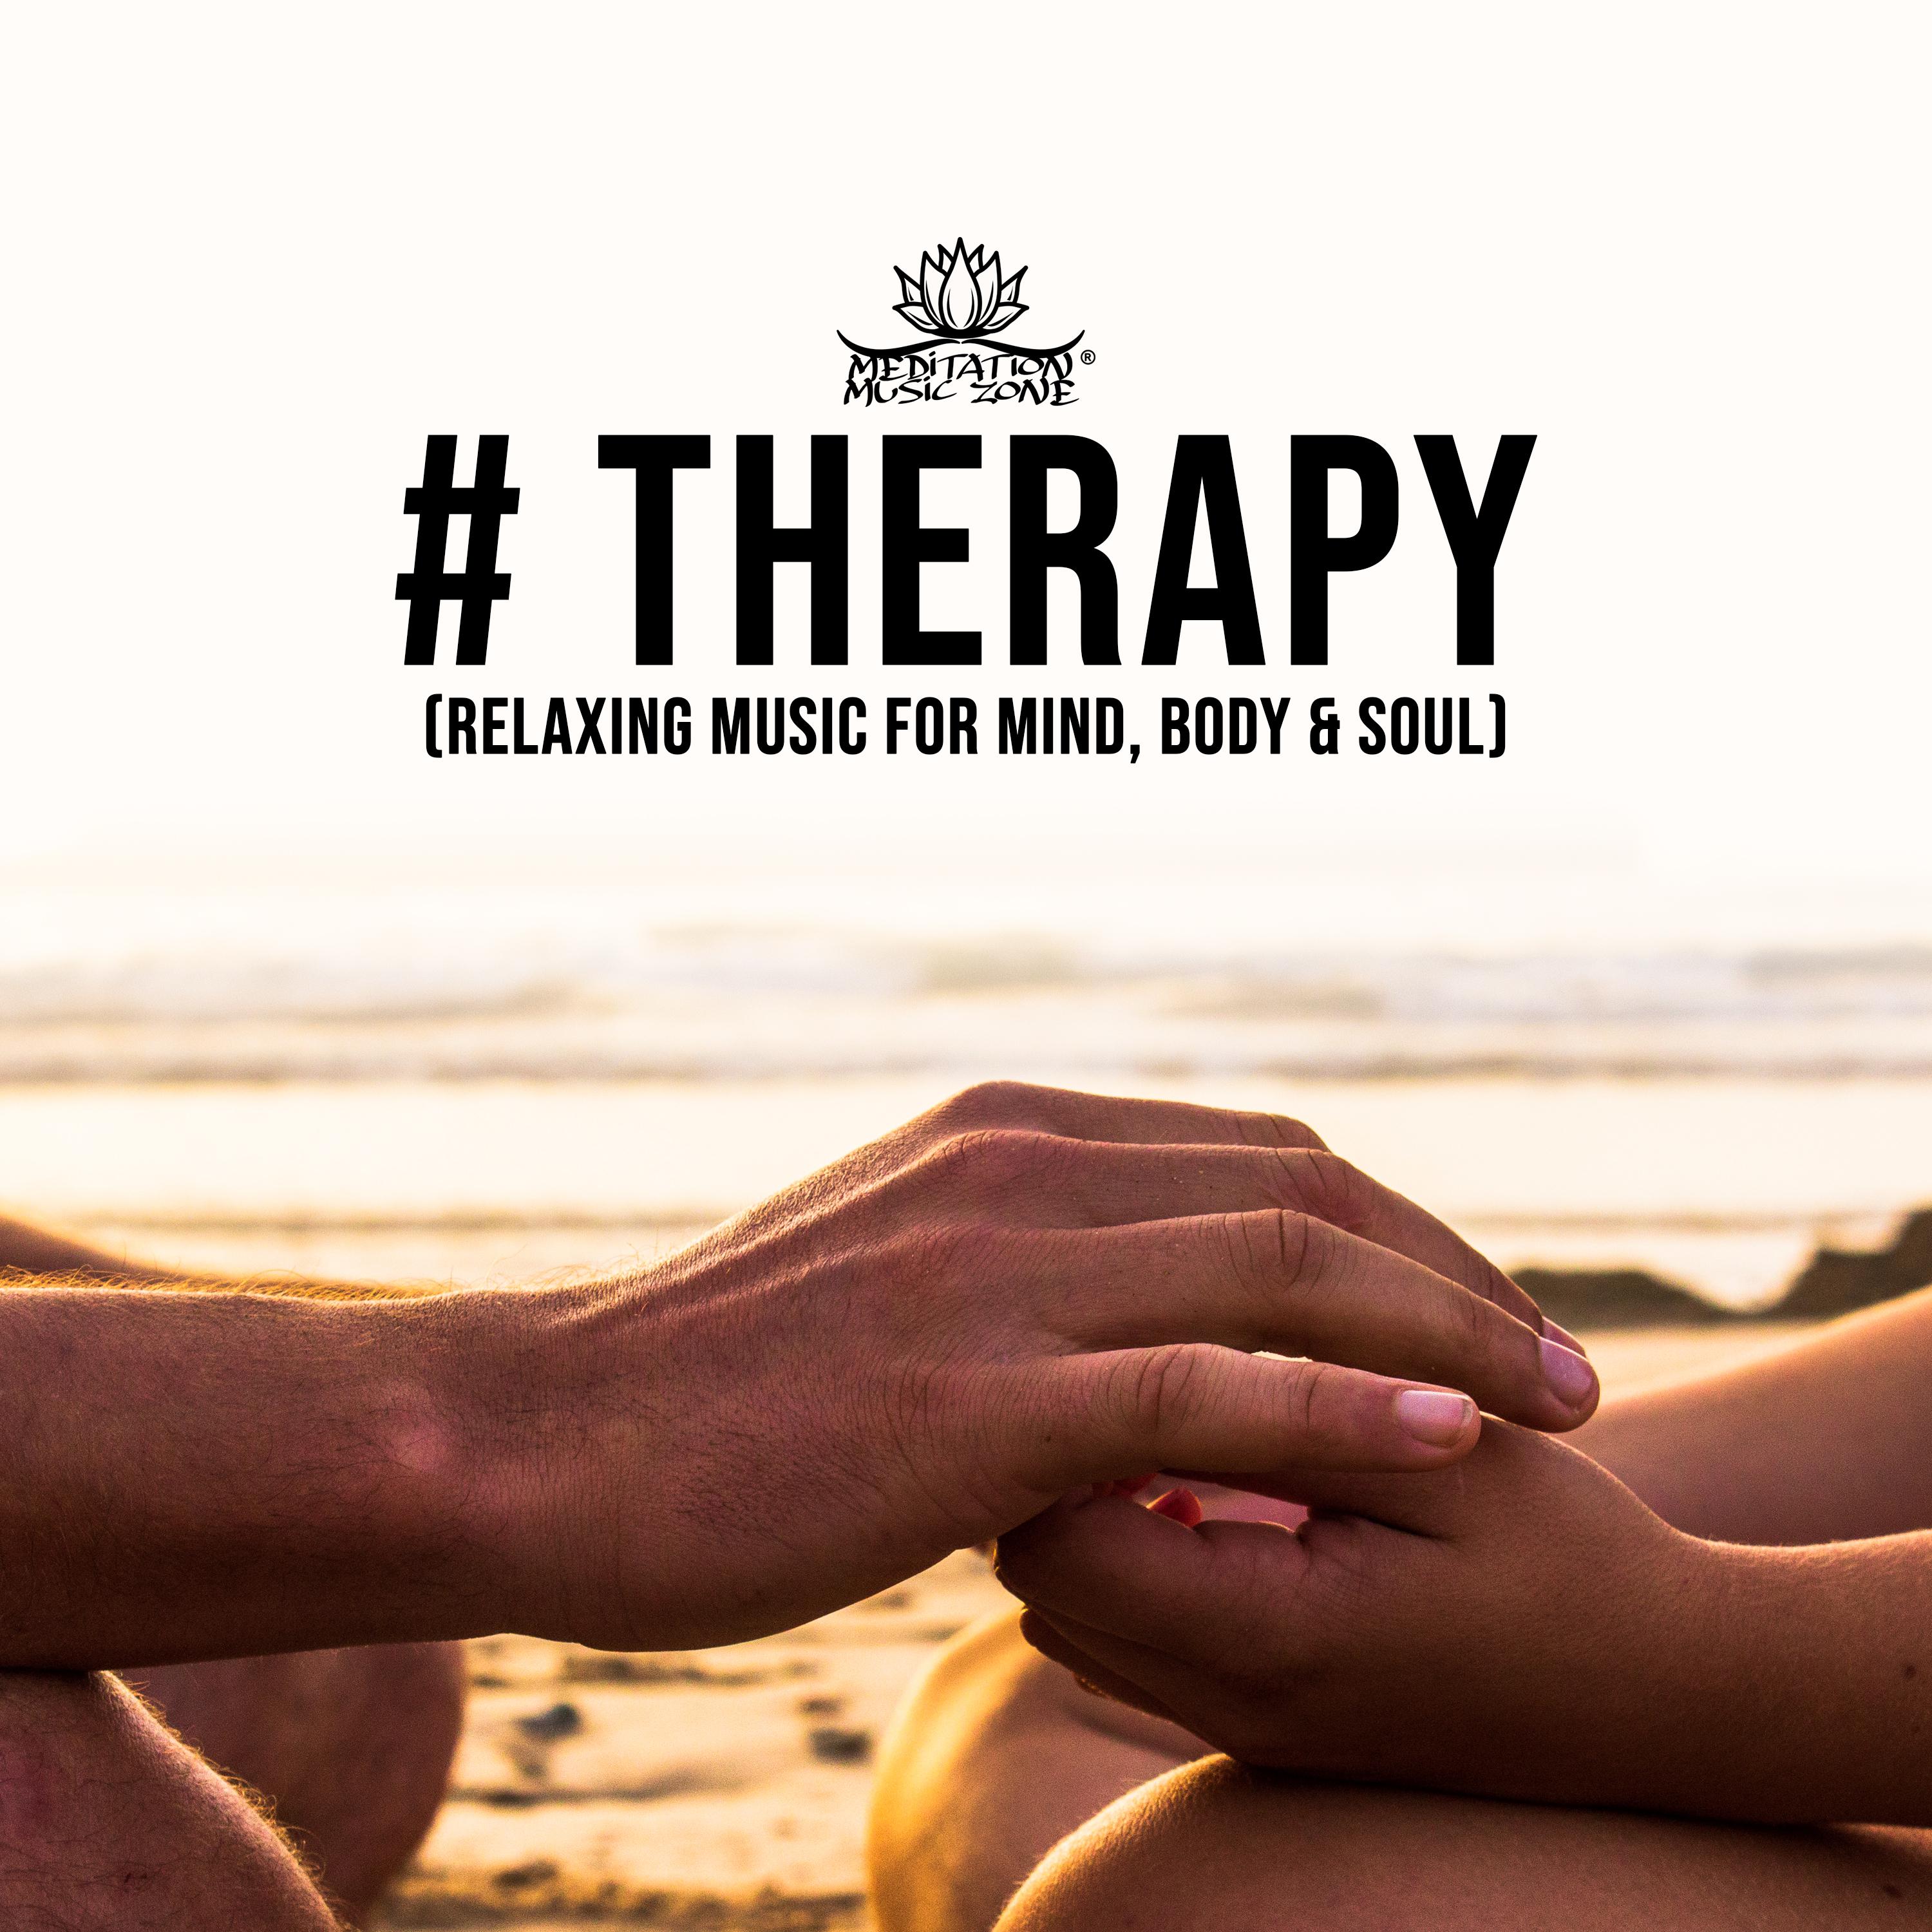 # Therapy (Relaxing Music for Mind, Body & Soul)